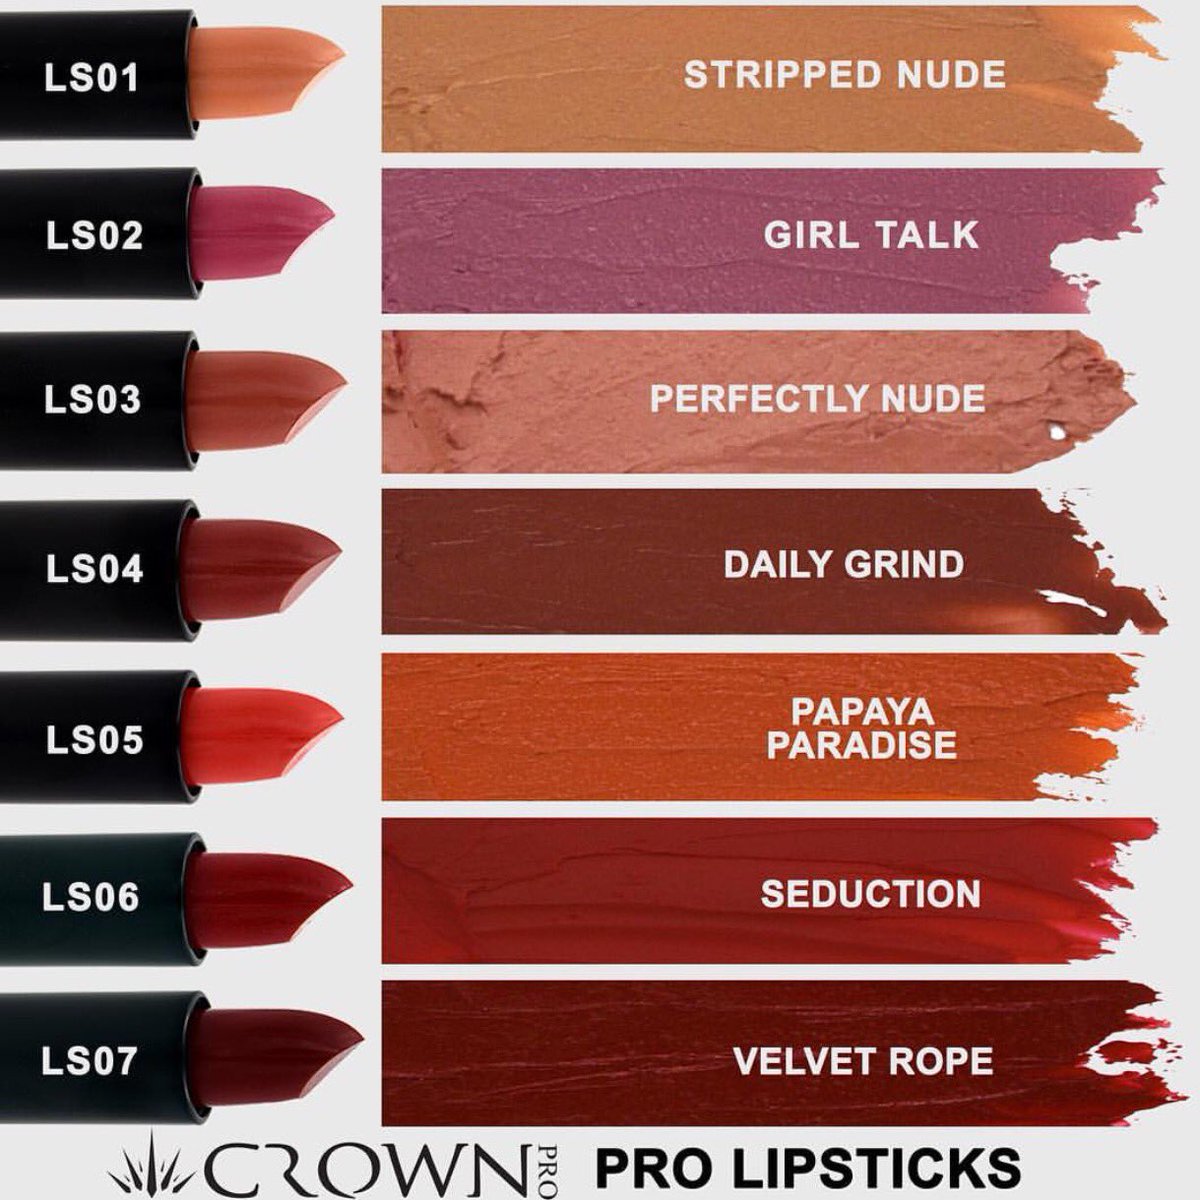 Crown Pro Stripped Lipstick, Stripped Nude (LS01) - ADDROS.COM